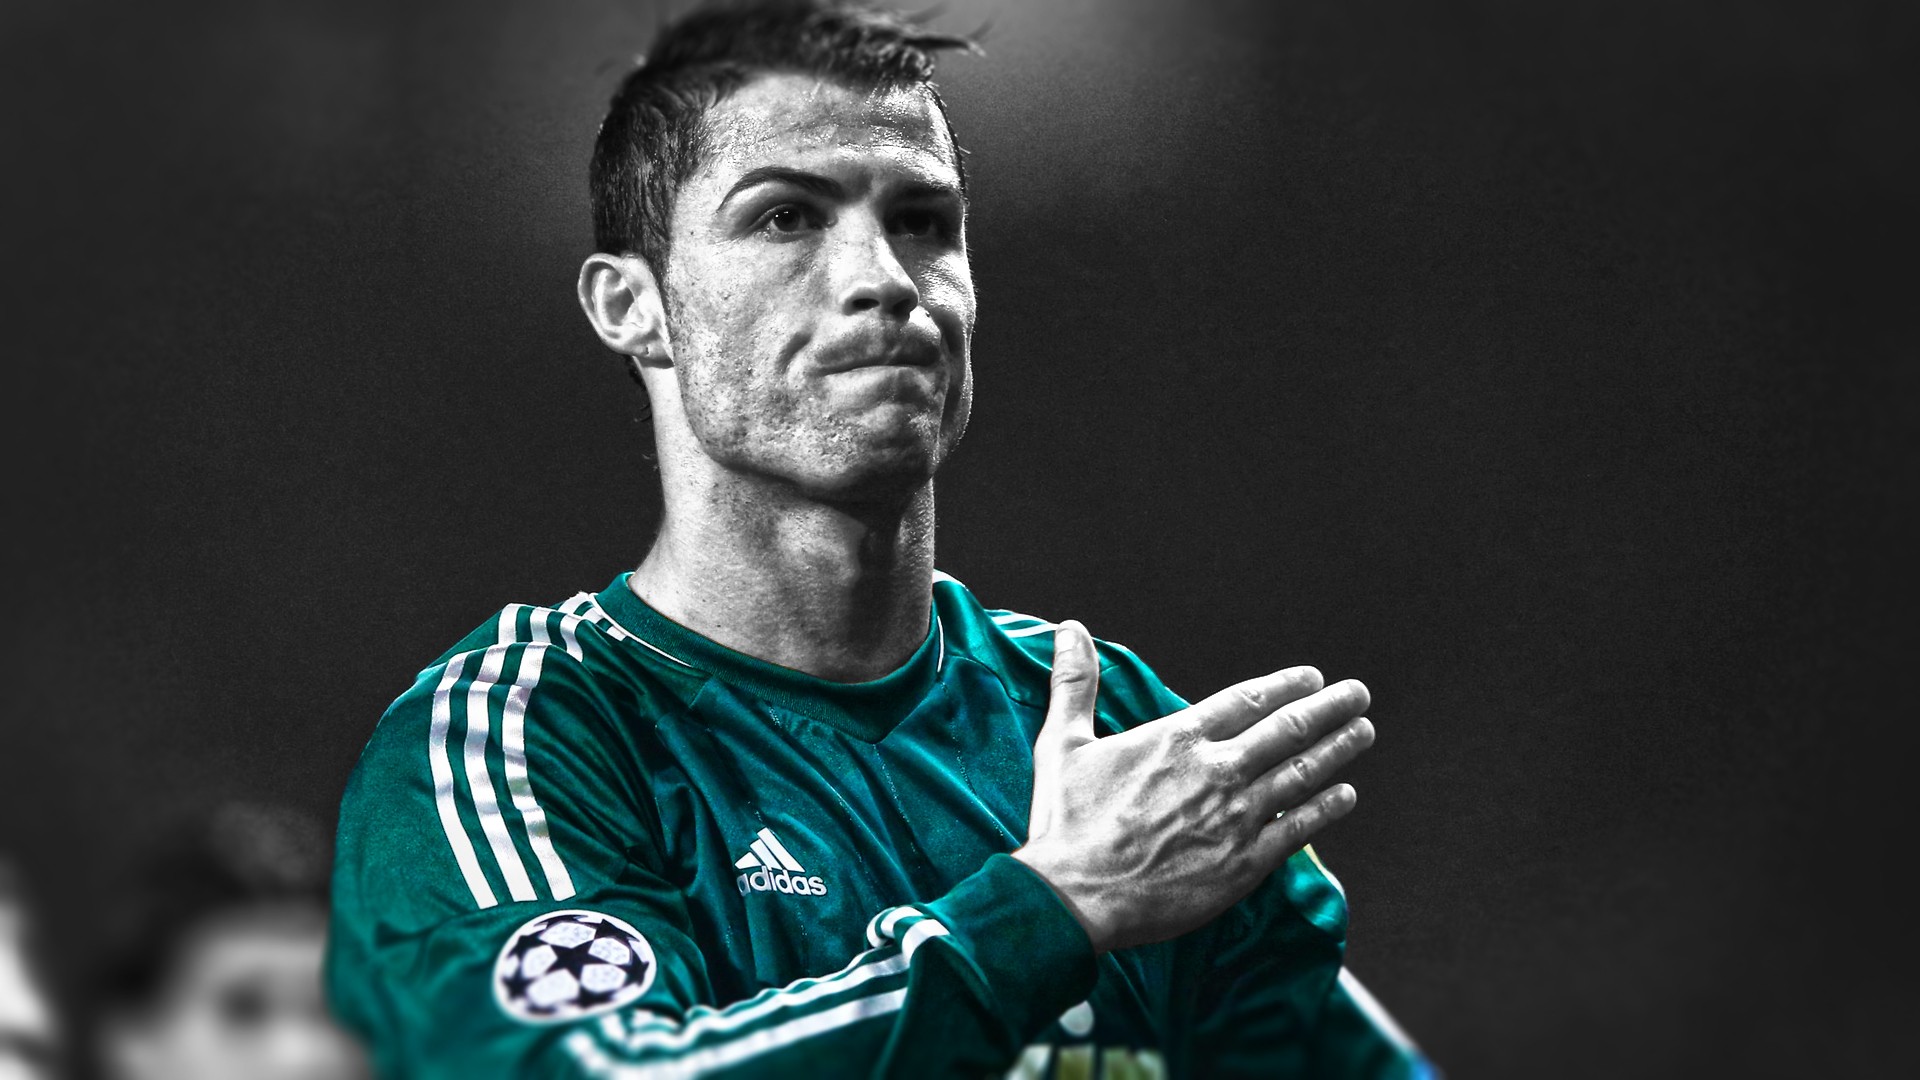 Cristiano Ronaldo HD Wallpapers Right Click Save Target As